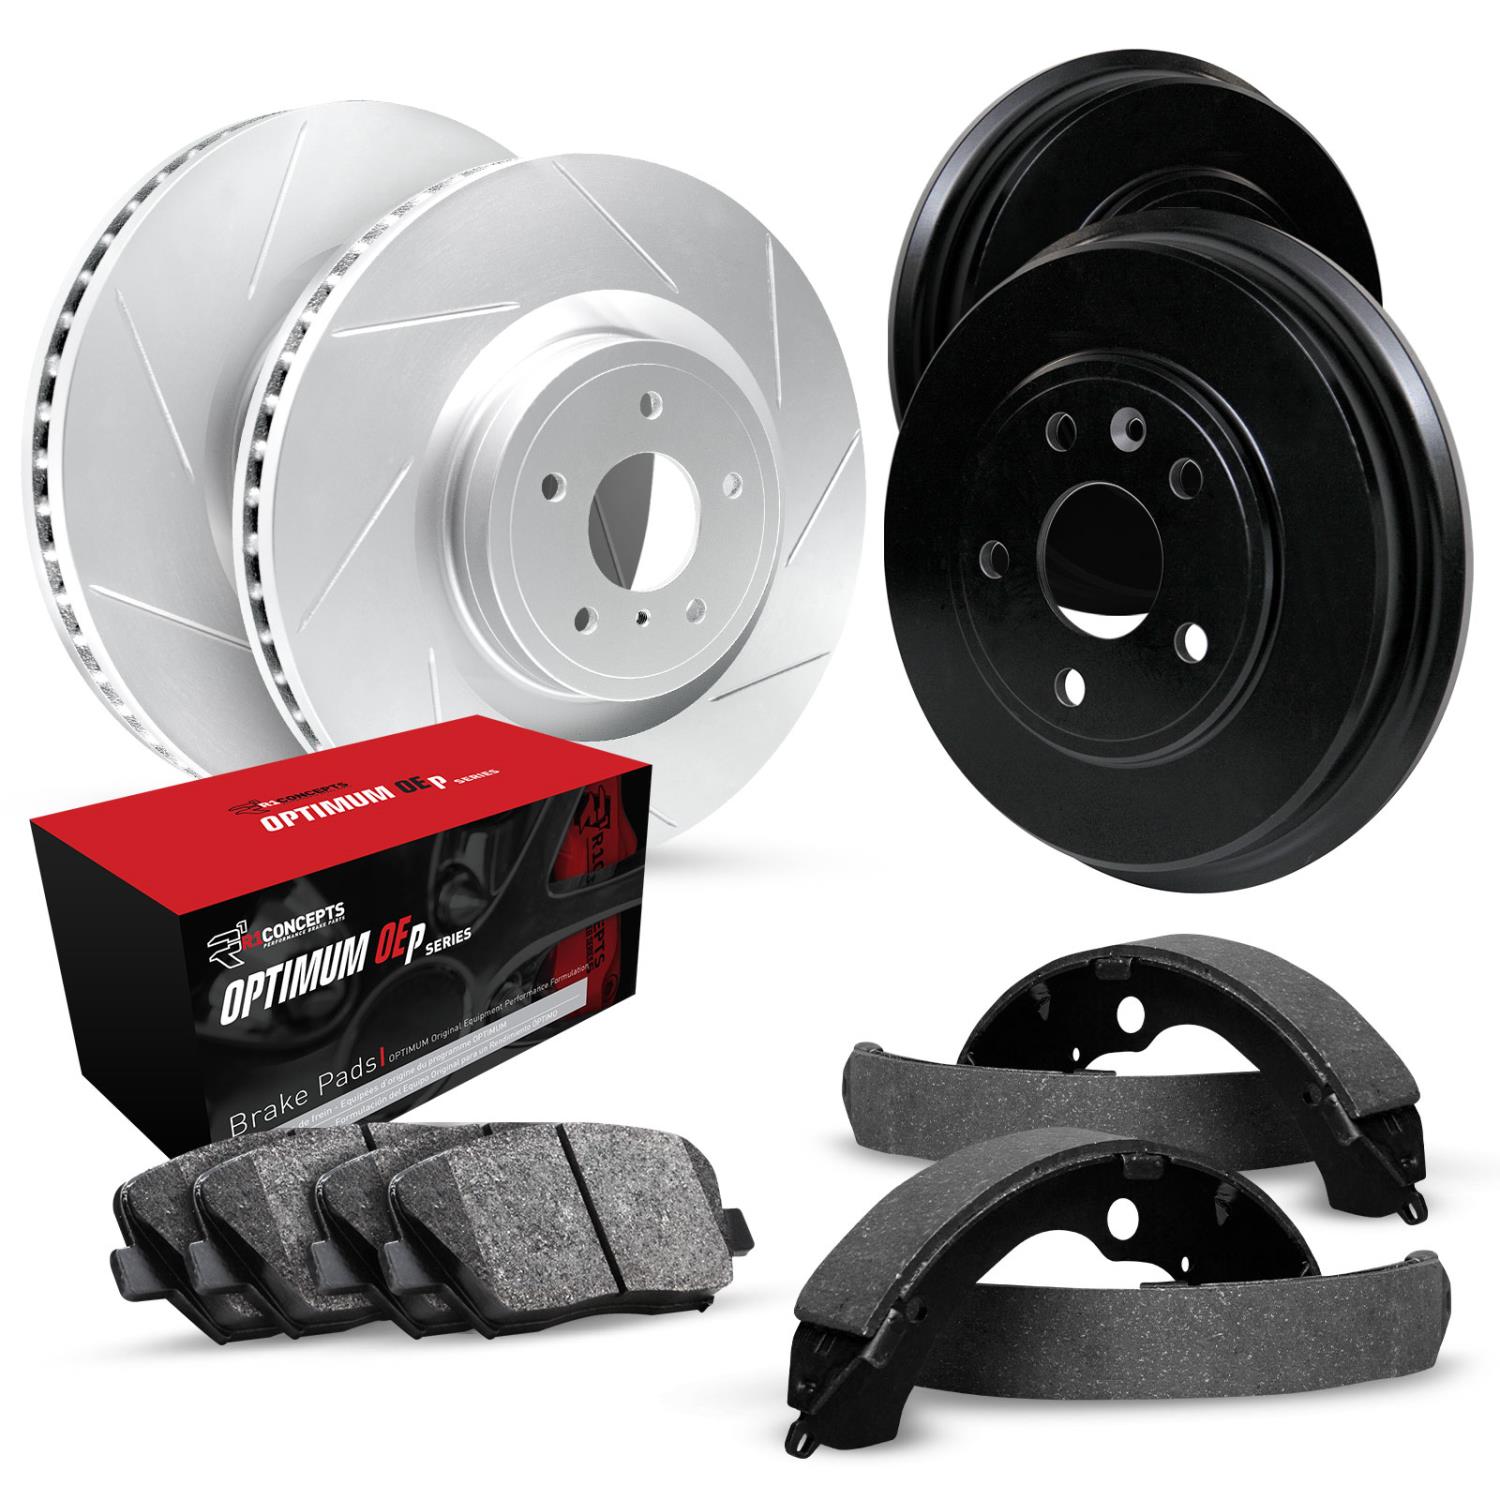 GEO-Carbon Slotted Brake Rotor & Drum Set w/Optimum OE Pads & Shoes, 1999-2001 Ford/Lincoln/Mercury/Mazda